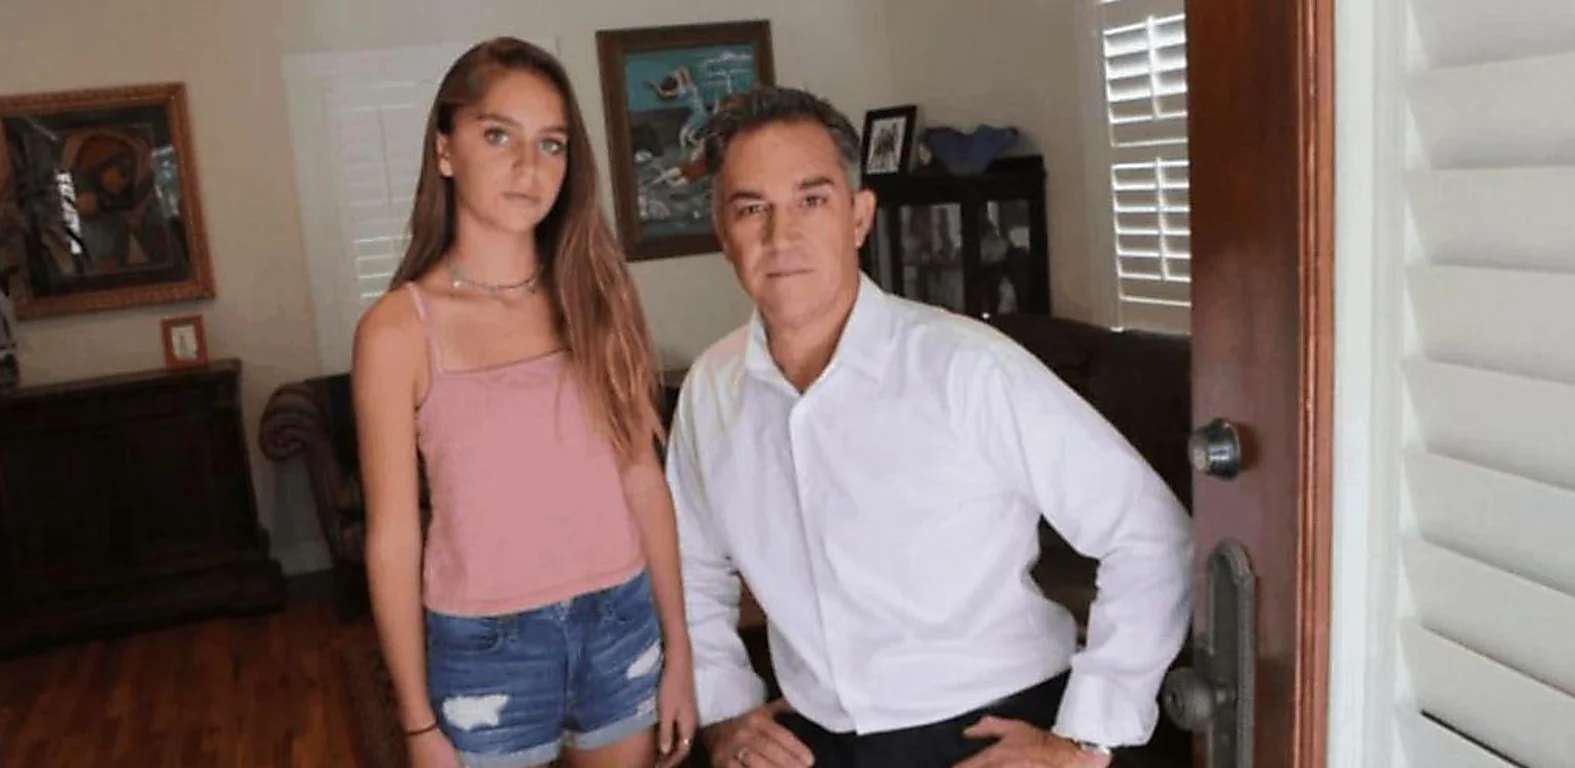 Outbrain Ad Example 47380 - [Photos] School Expels Teen Over Outfit, Regrets It When They See Who Dad Is